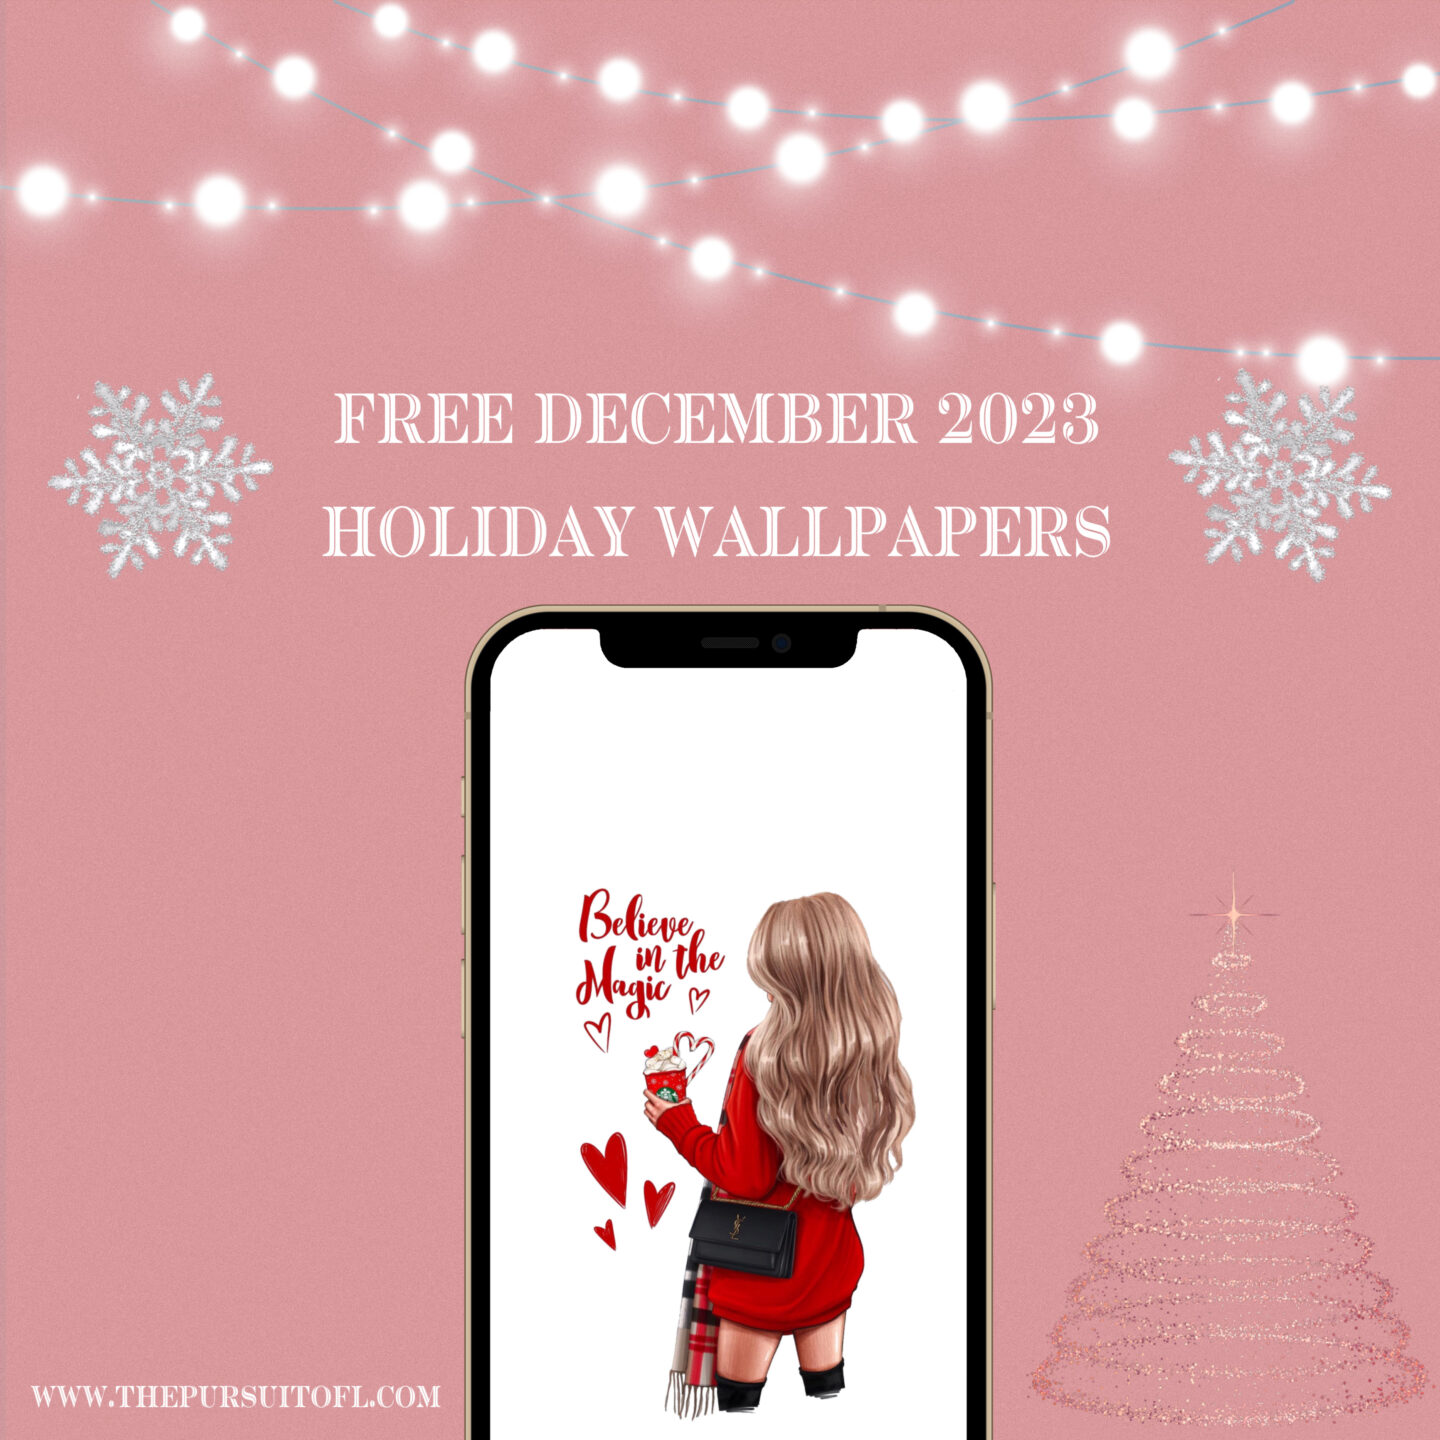 Free December 2023 Holiday Wallpapers, The Pursuit of L